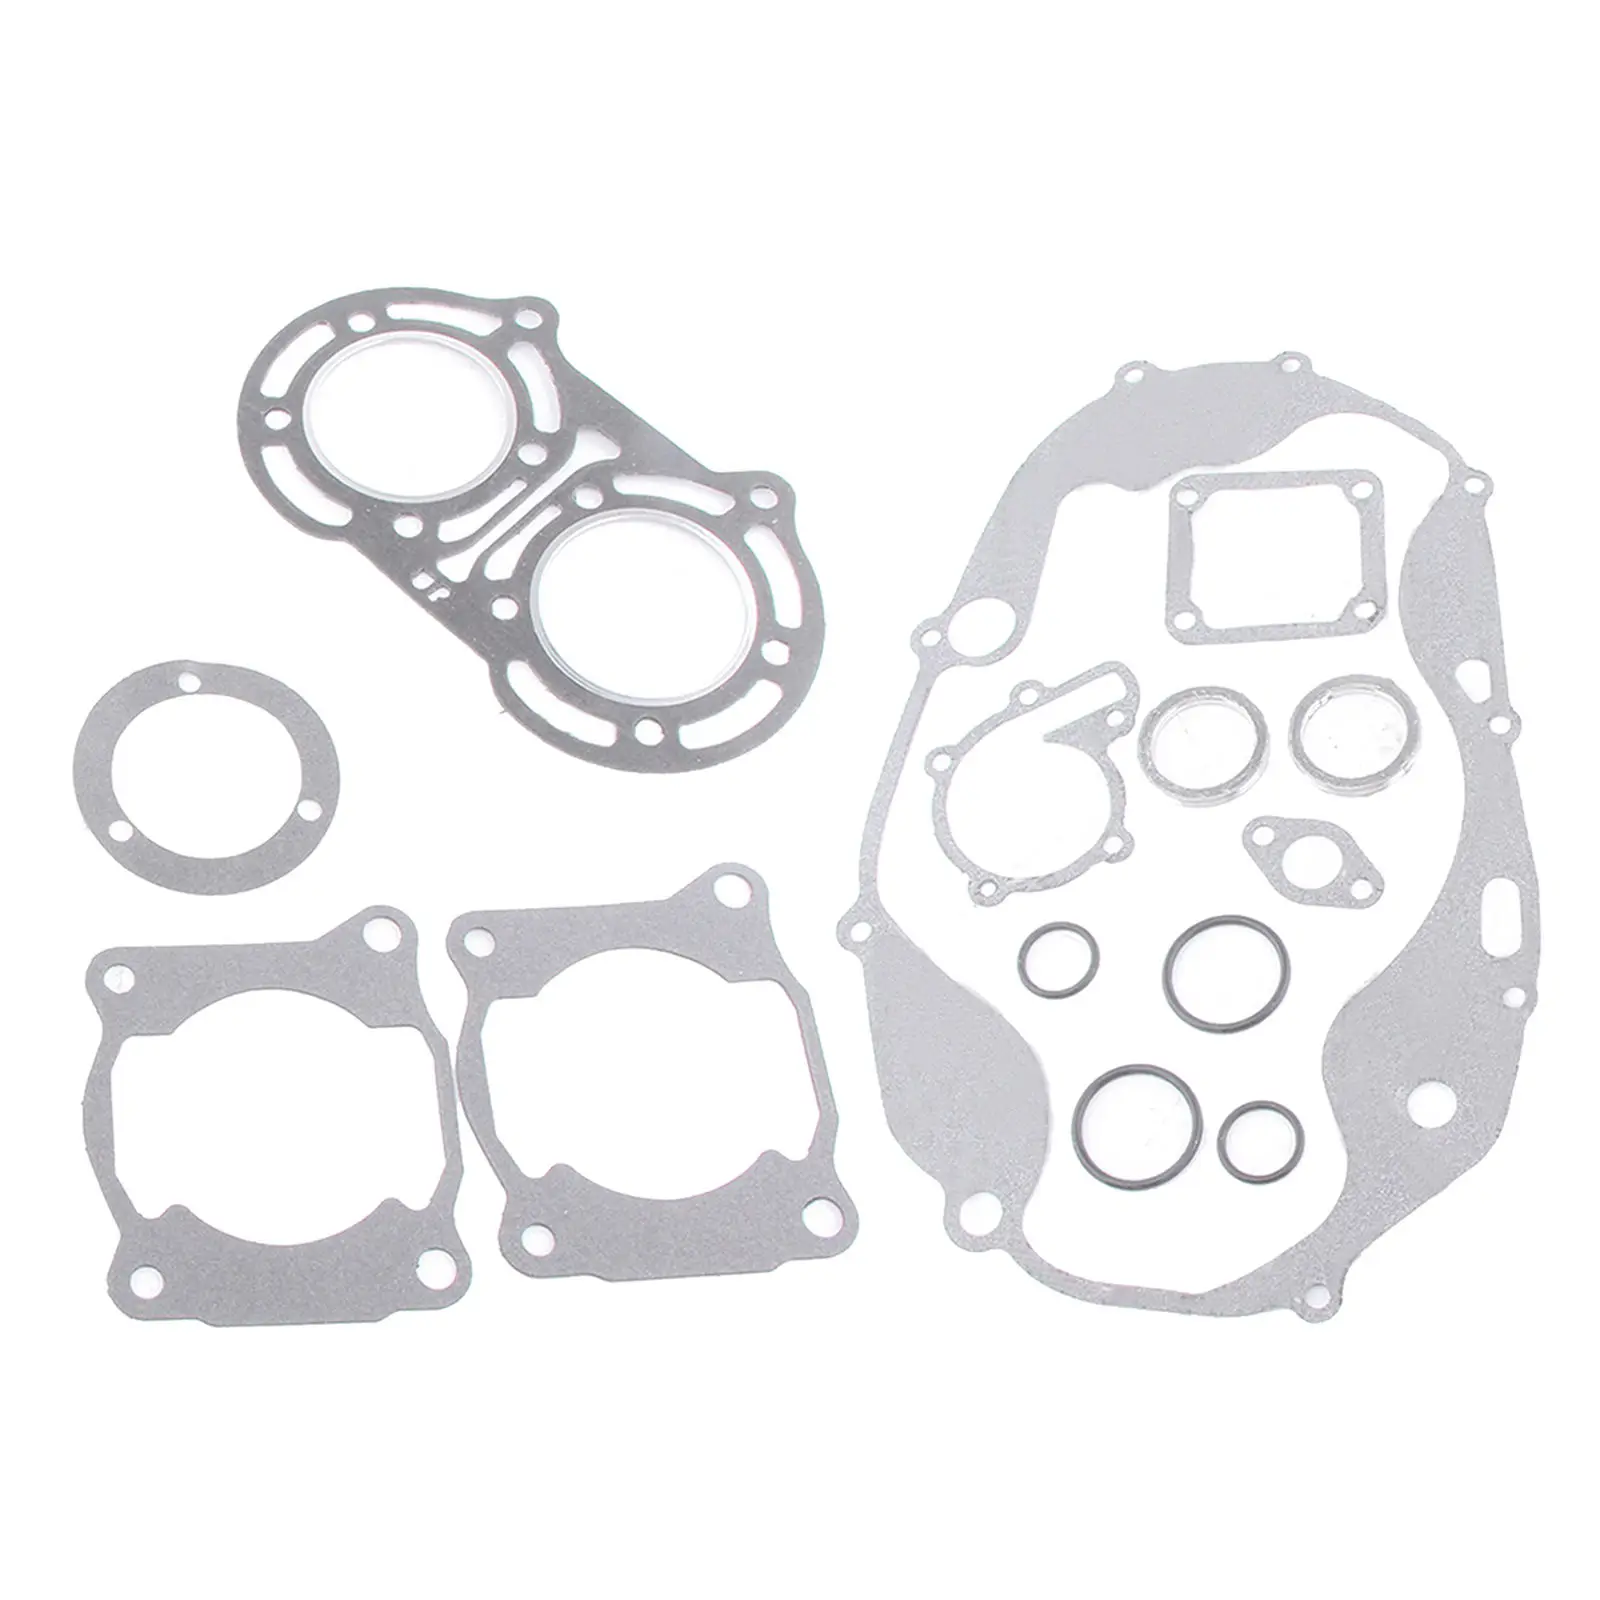 Replacement Complete Engine Gasket Kit for Yamaha ATV YFZ350 1987-2006 GS34